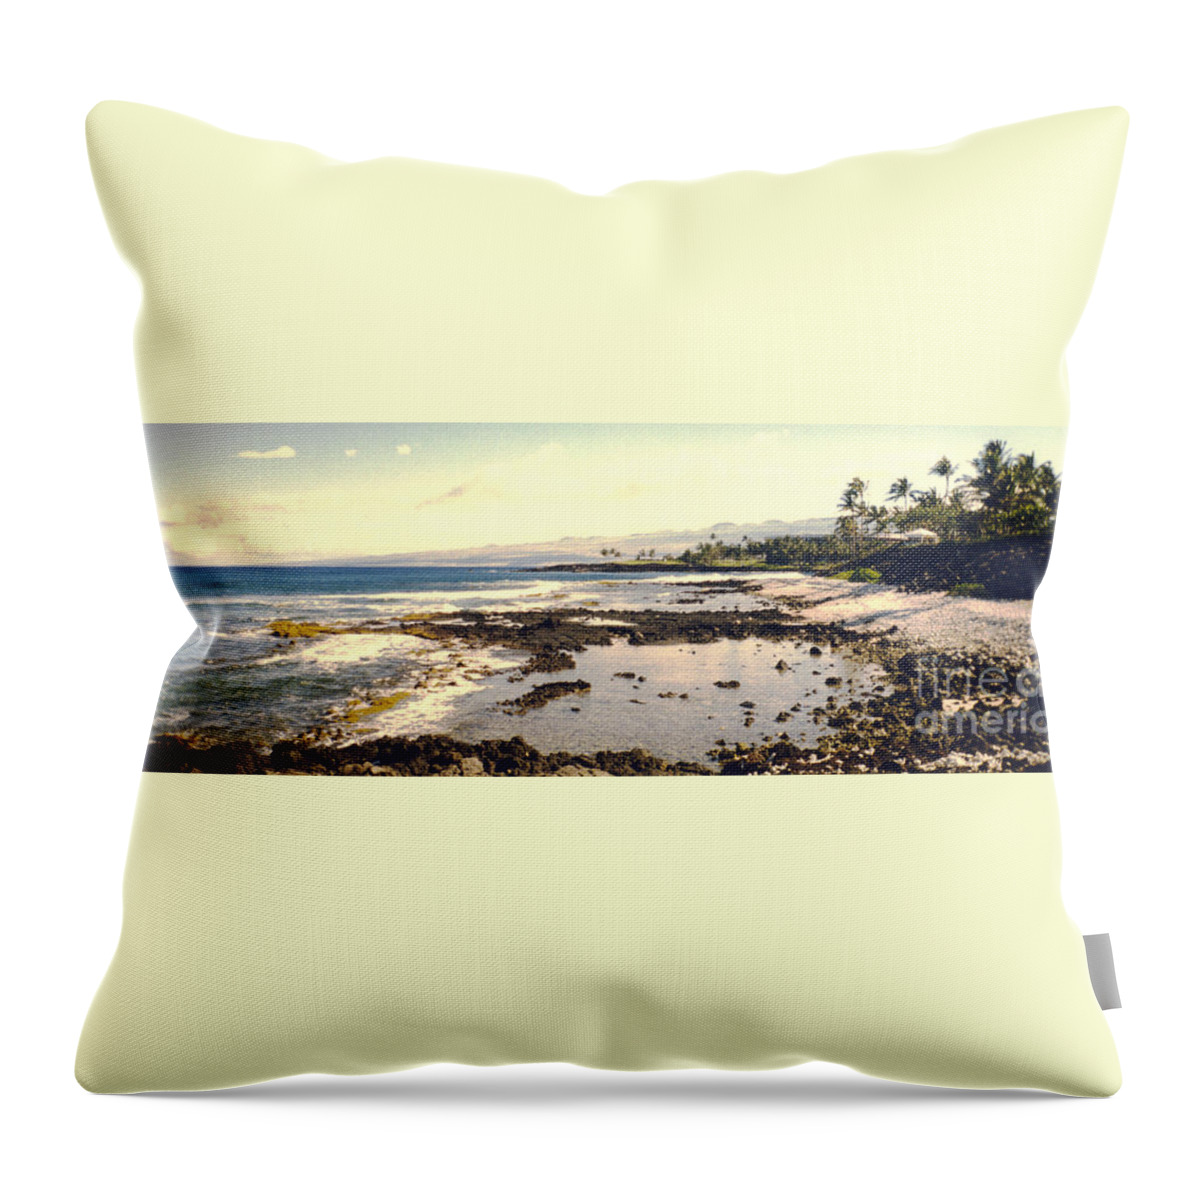 Landscape Seascape Throw Pillow featuring the photograph Big Island 1 by Helena M Langley